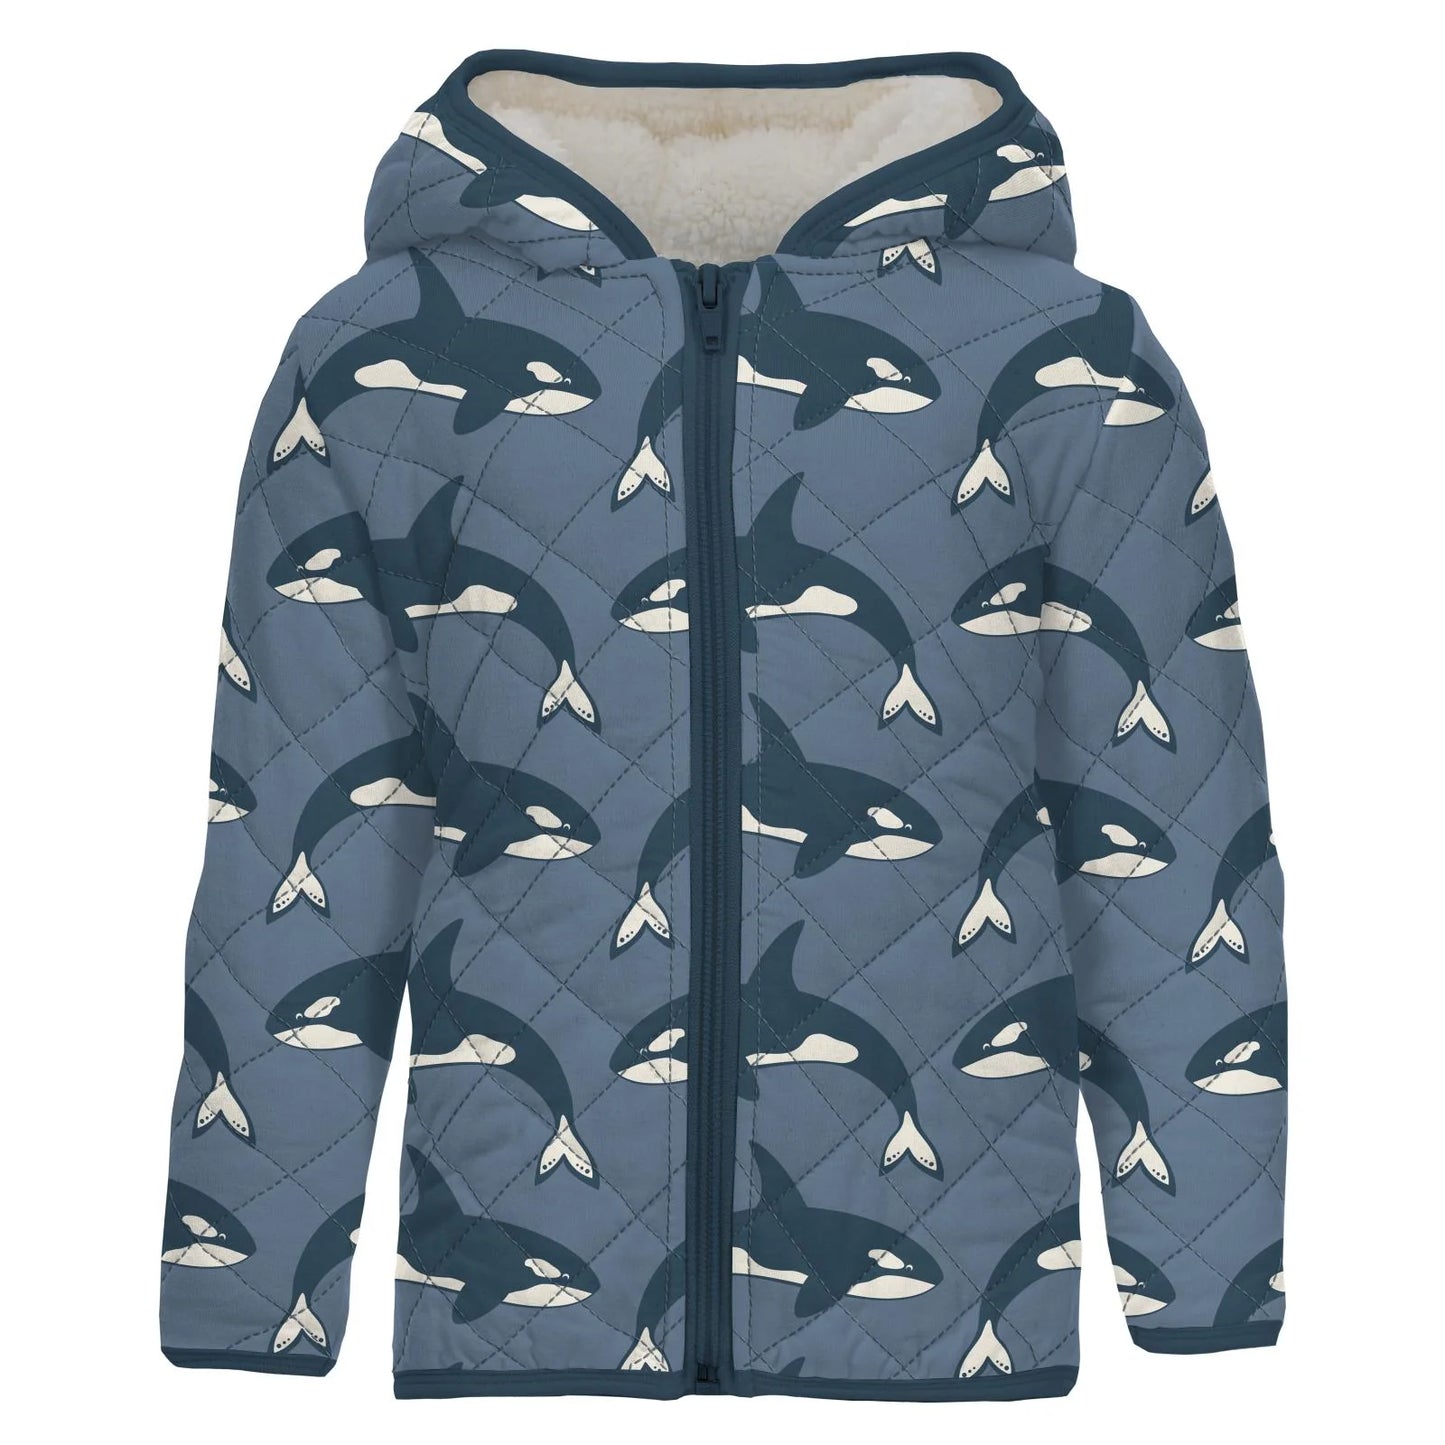 Bamboo Print Quilted Jacket with Sherpa-Lined Hood: Parisian Blue Orca/Dino Stripe